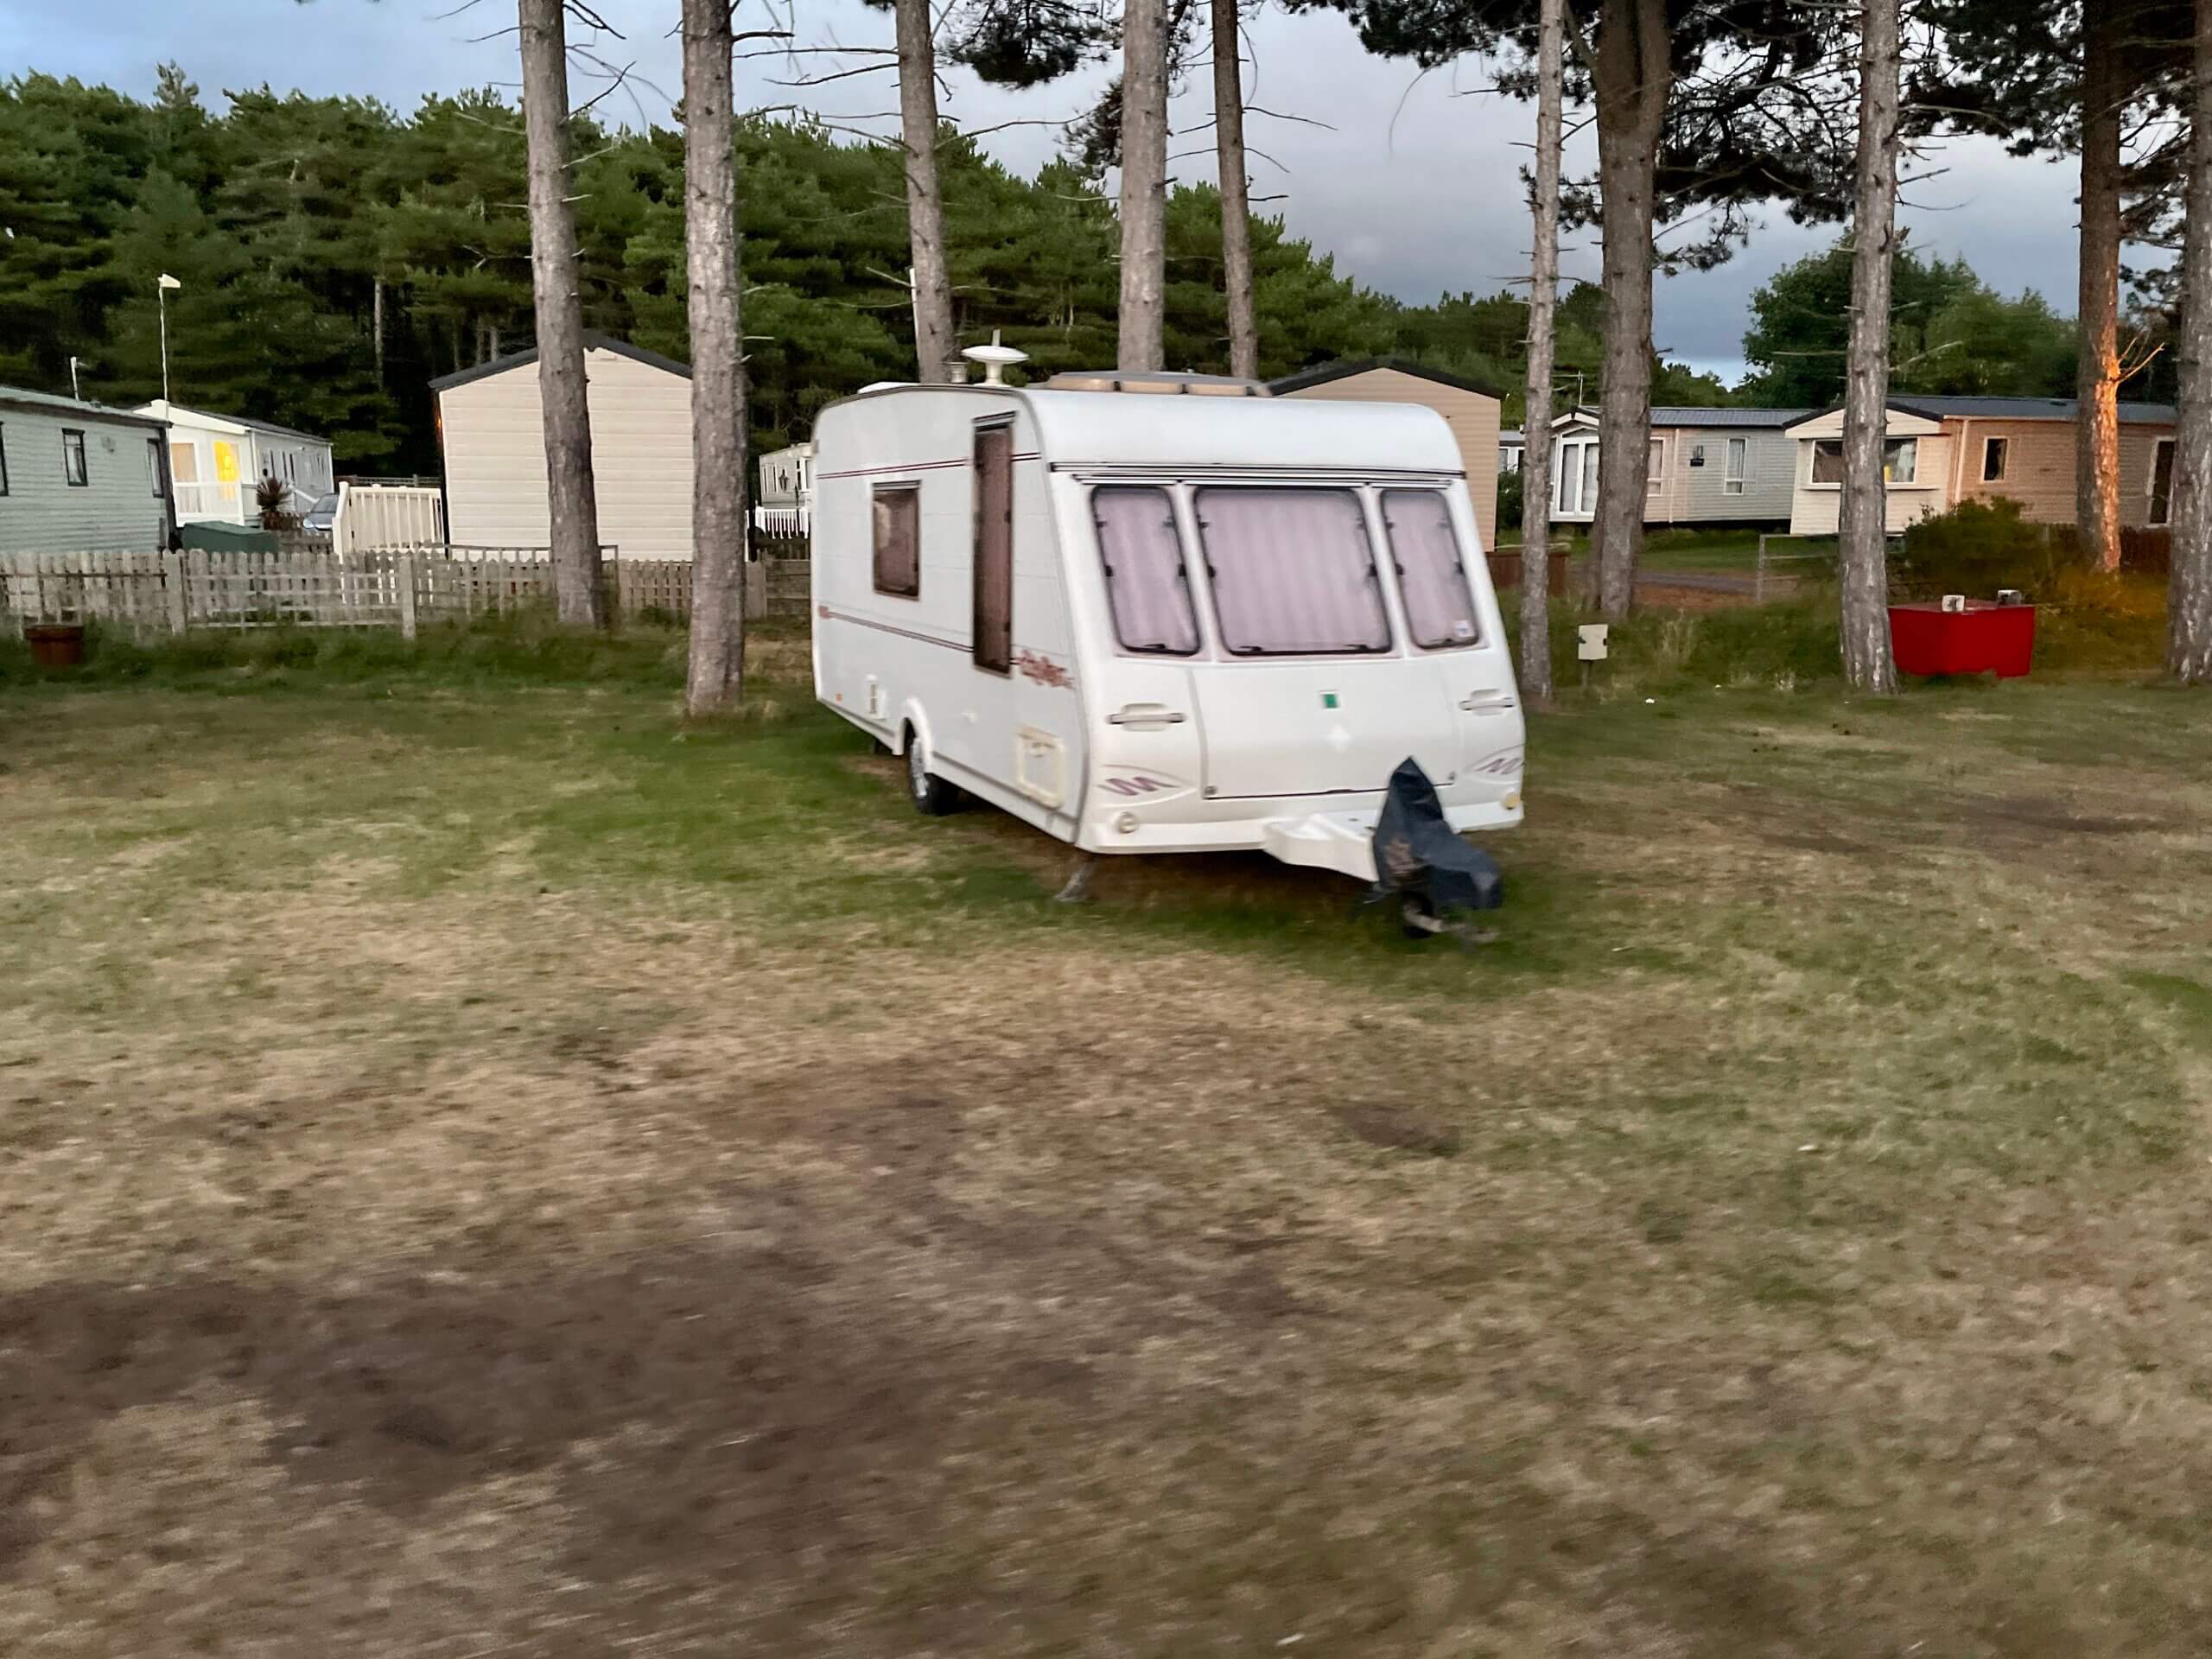 Can I Tow A Caravan After Age 70?